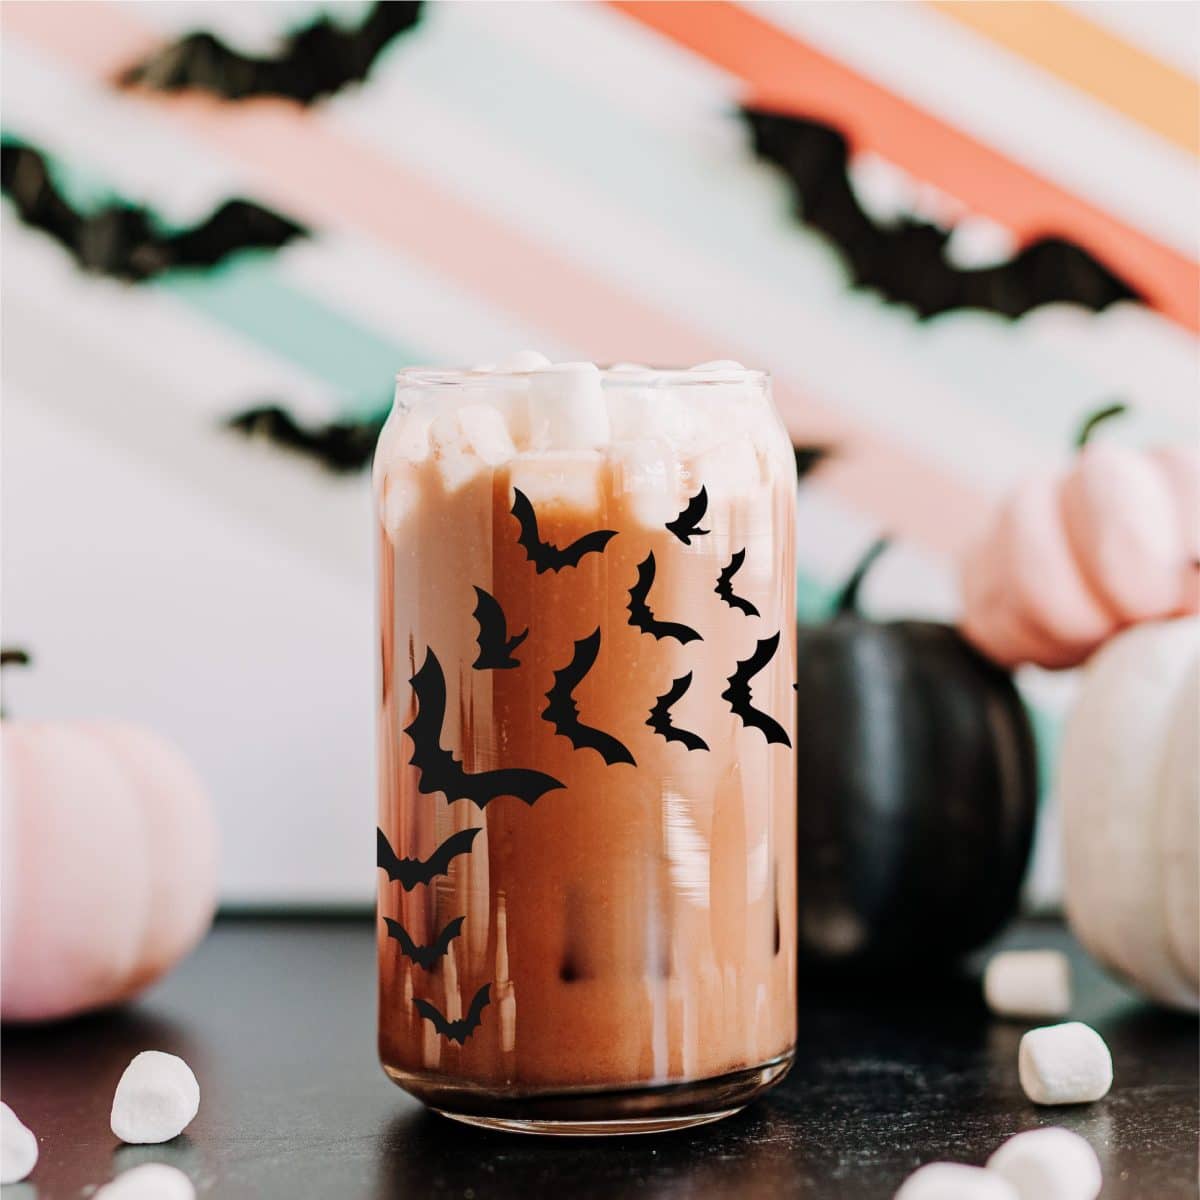 Flying Bats Halloween Cup by Hey Let's Make Stuff